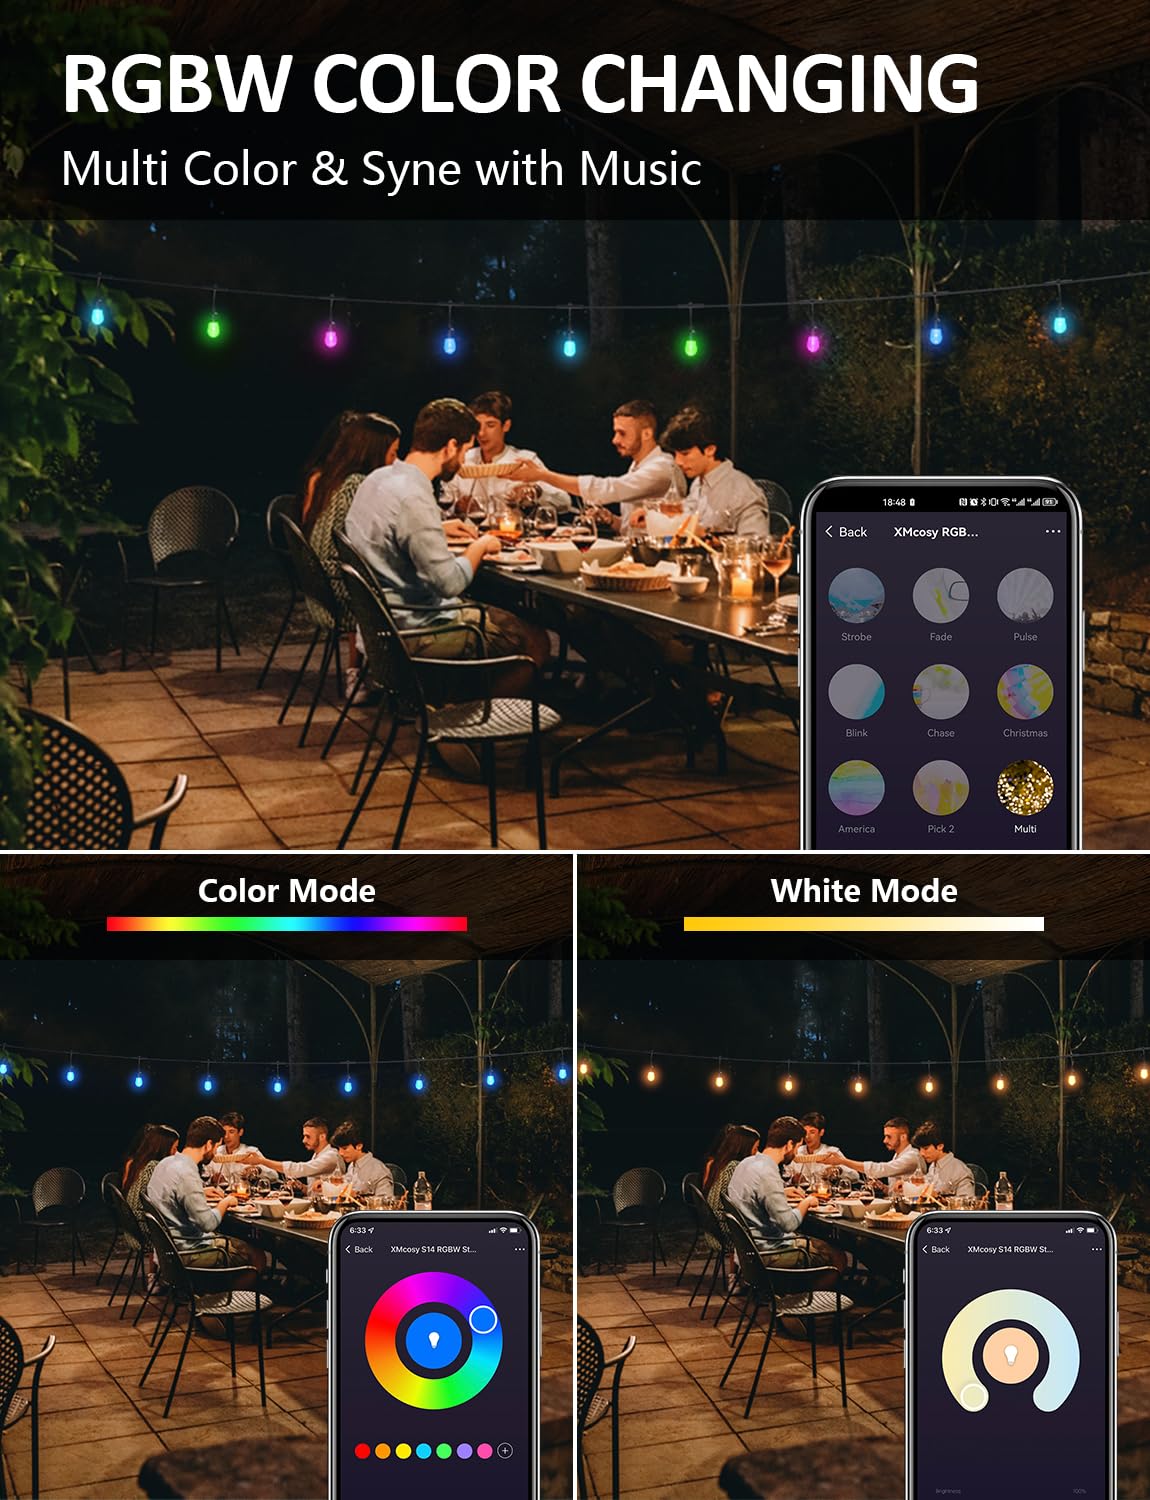 Mua XMCOSY+ Outdoor String Lights, Smart 49Ft Patio Lights RGB, App  WiFi  Control Color Changing LED String Lights with Dimmable 15 LED Bulbs, Works  with Alexa, IP65 Waterproof, Shatterproof trên Amazon